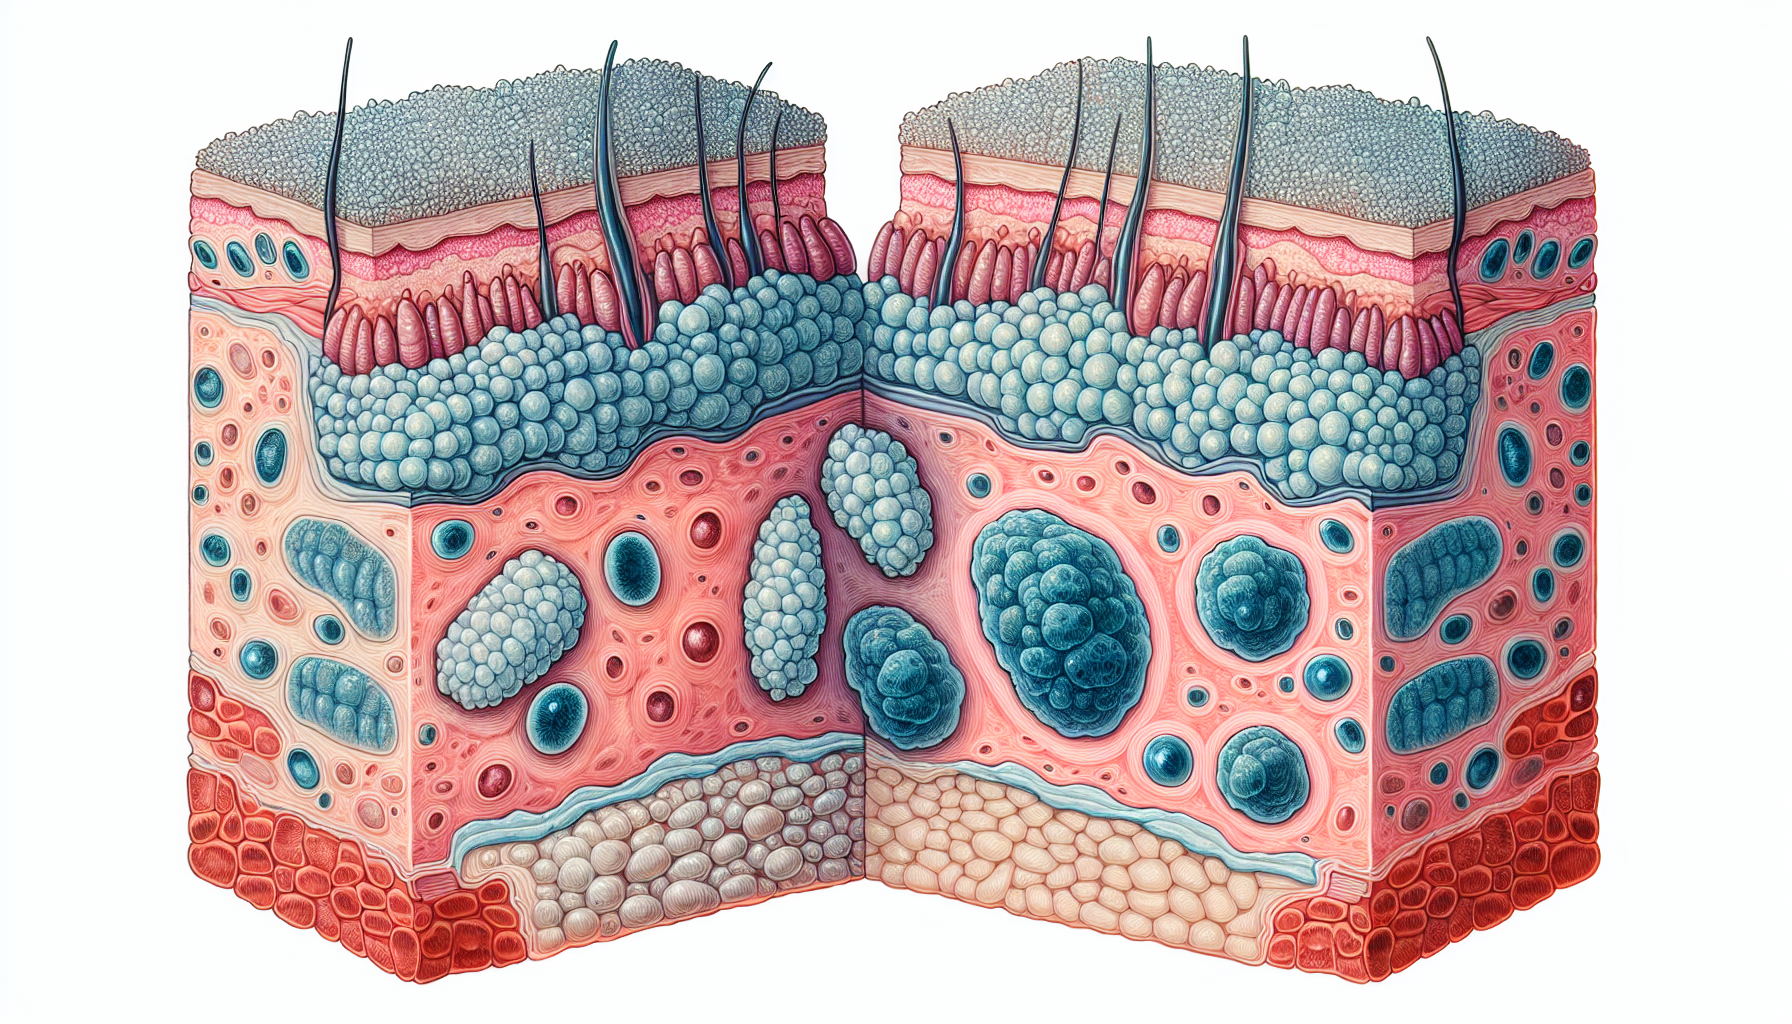 Illustration of basal cell carcinoma and squamous cell carcinoma